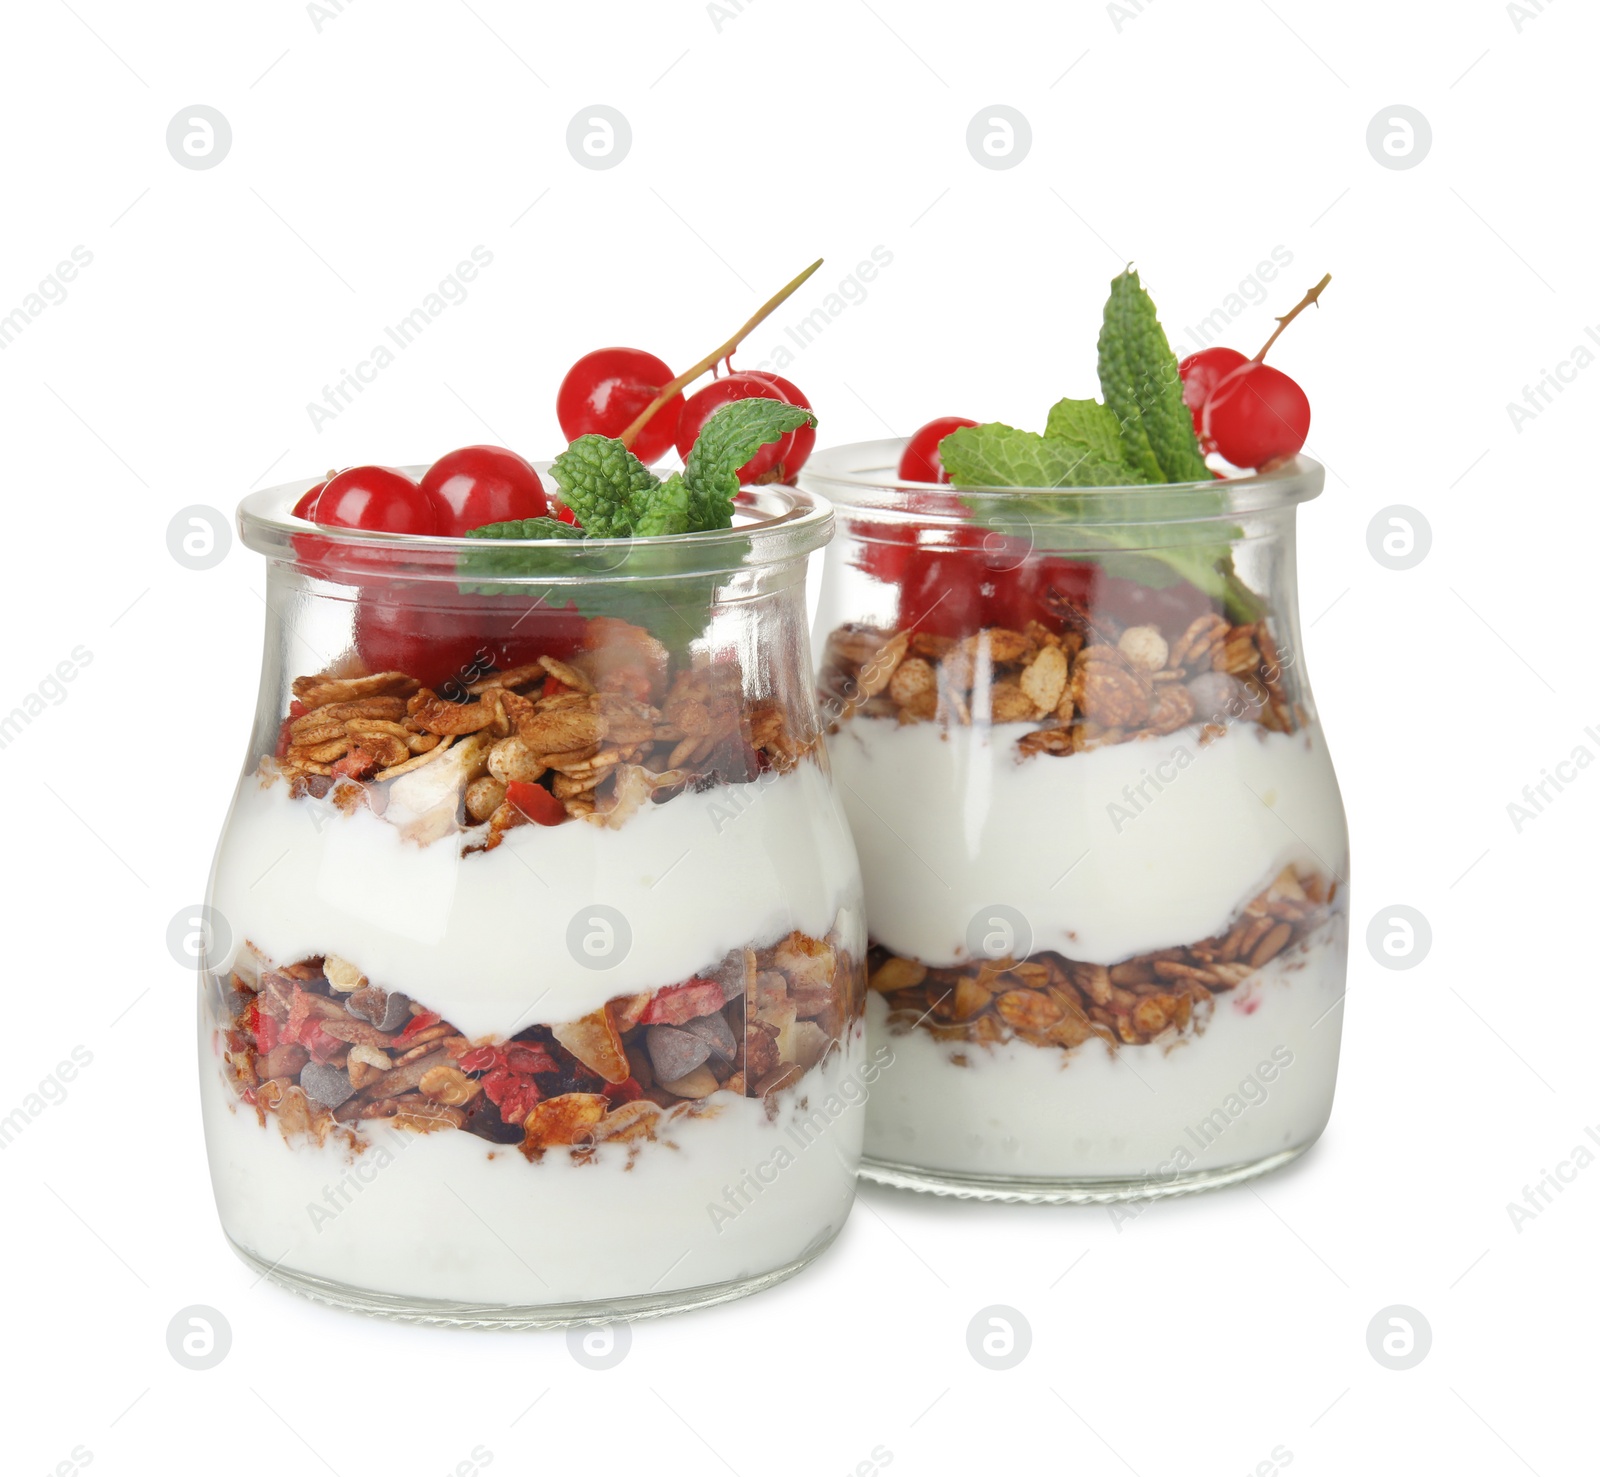 Photo of Delicious yogurt parfait with fresh red currants and mint on white background